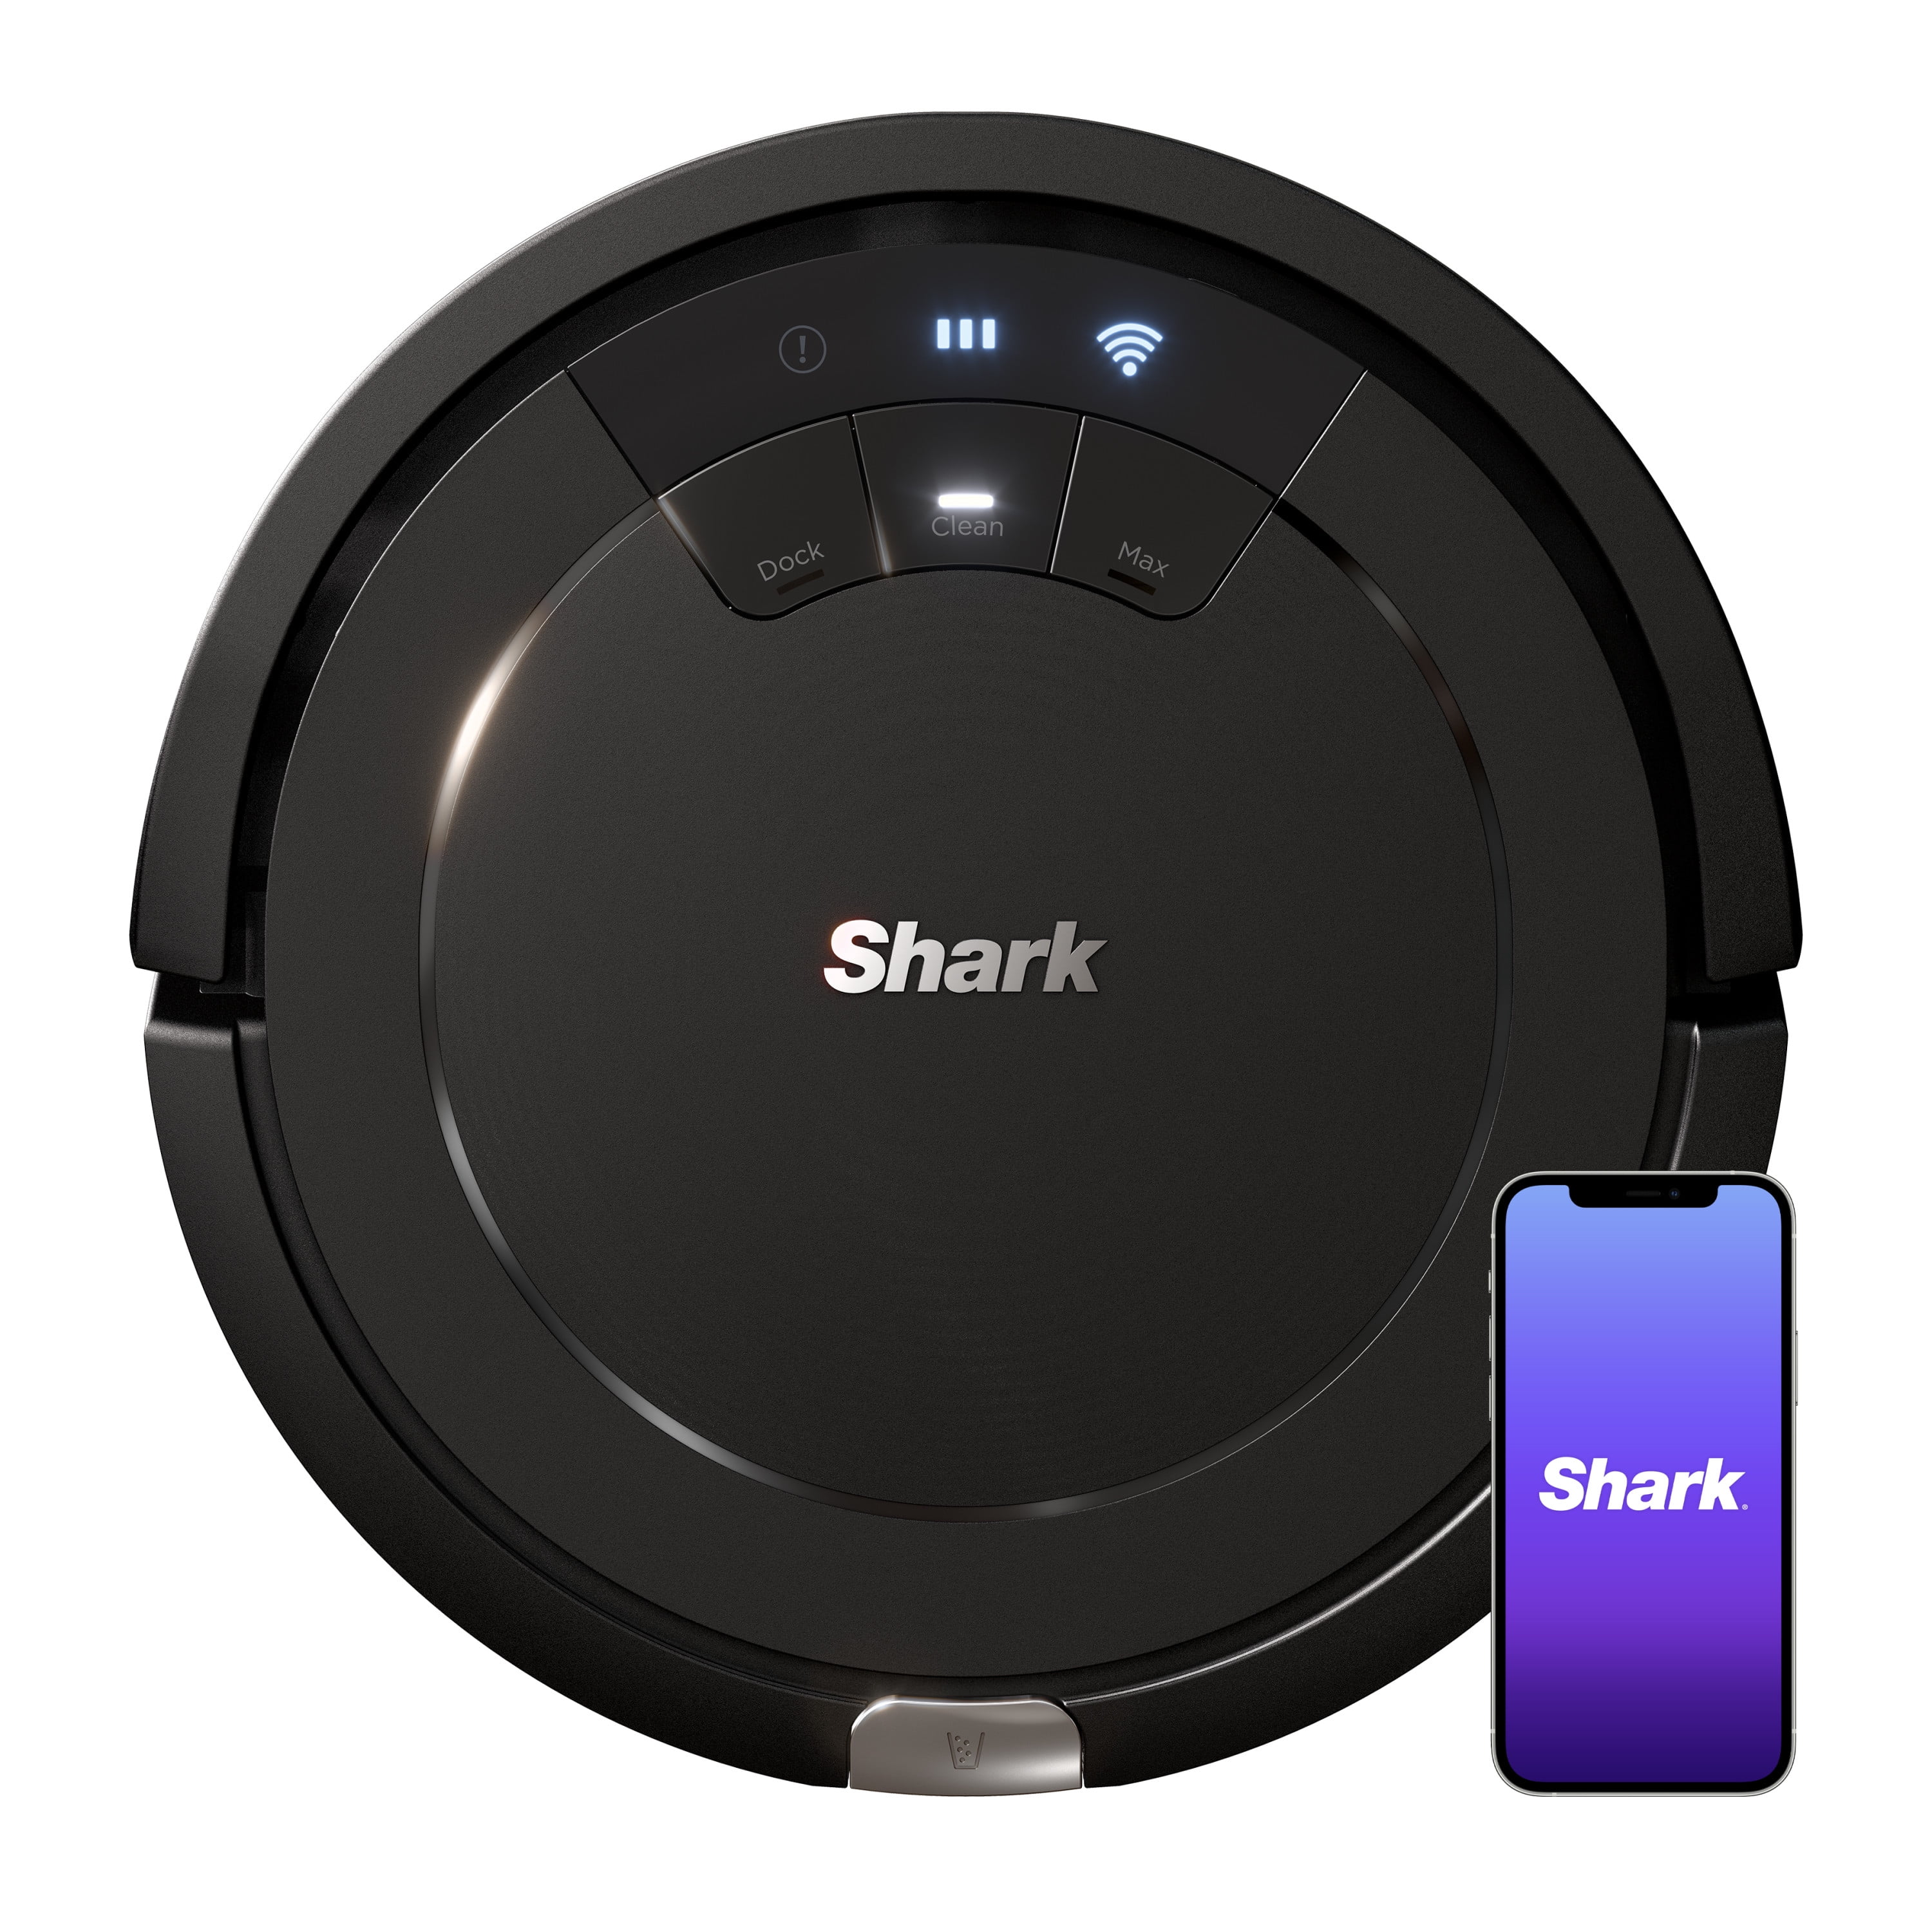 Shark ION Robot Wi-Fi Connected, Works with Google Assistant, Multi-Surface Hard Floors, Black, RV754 - Walmart.com